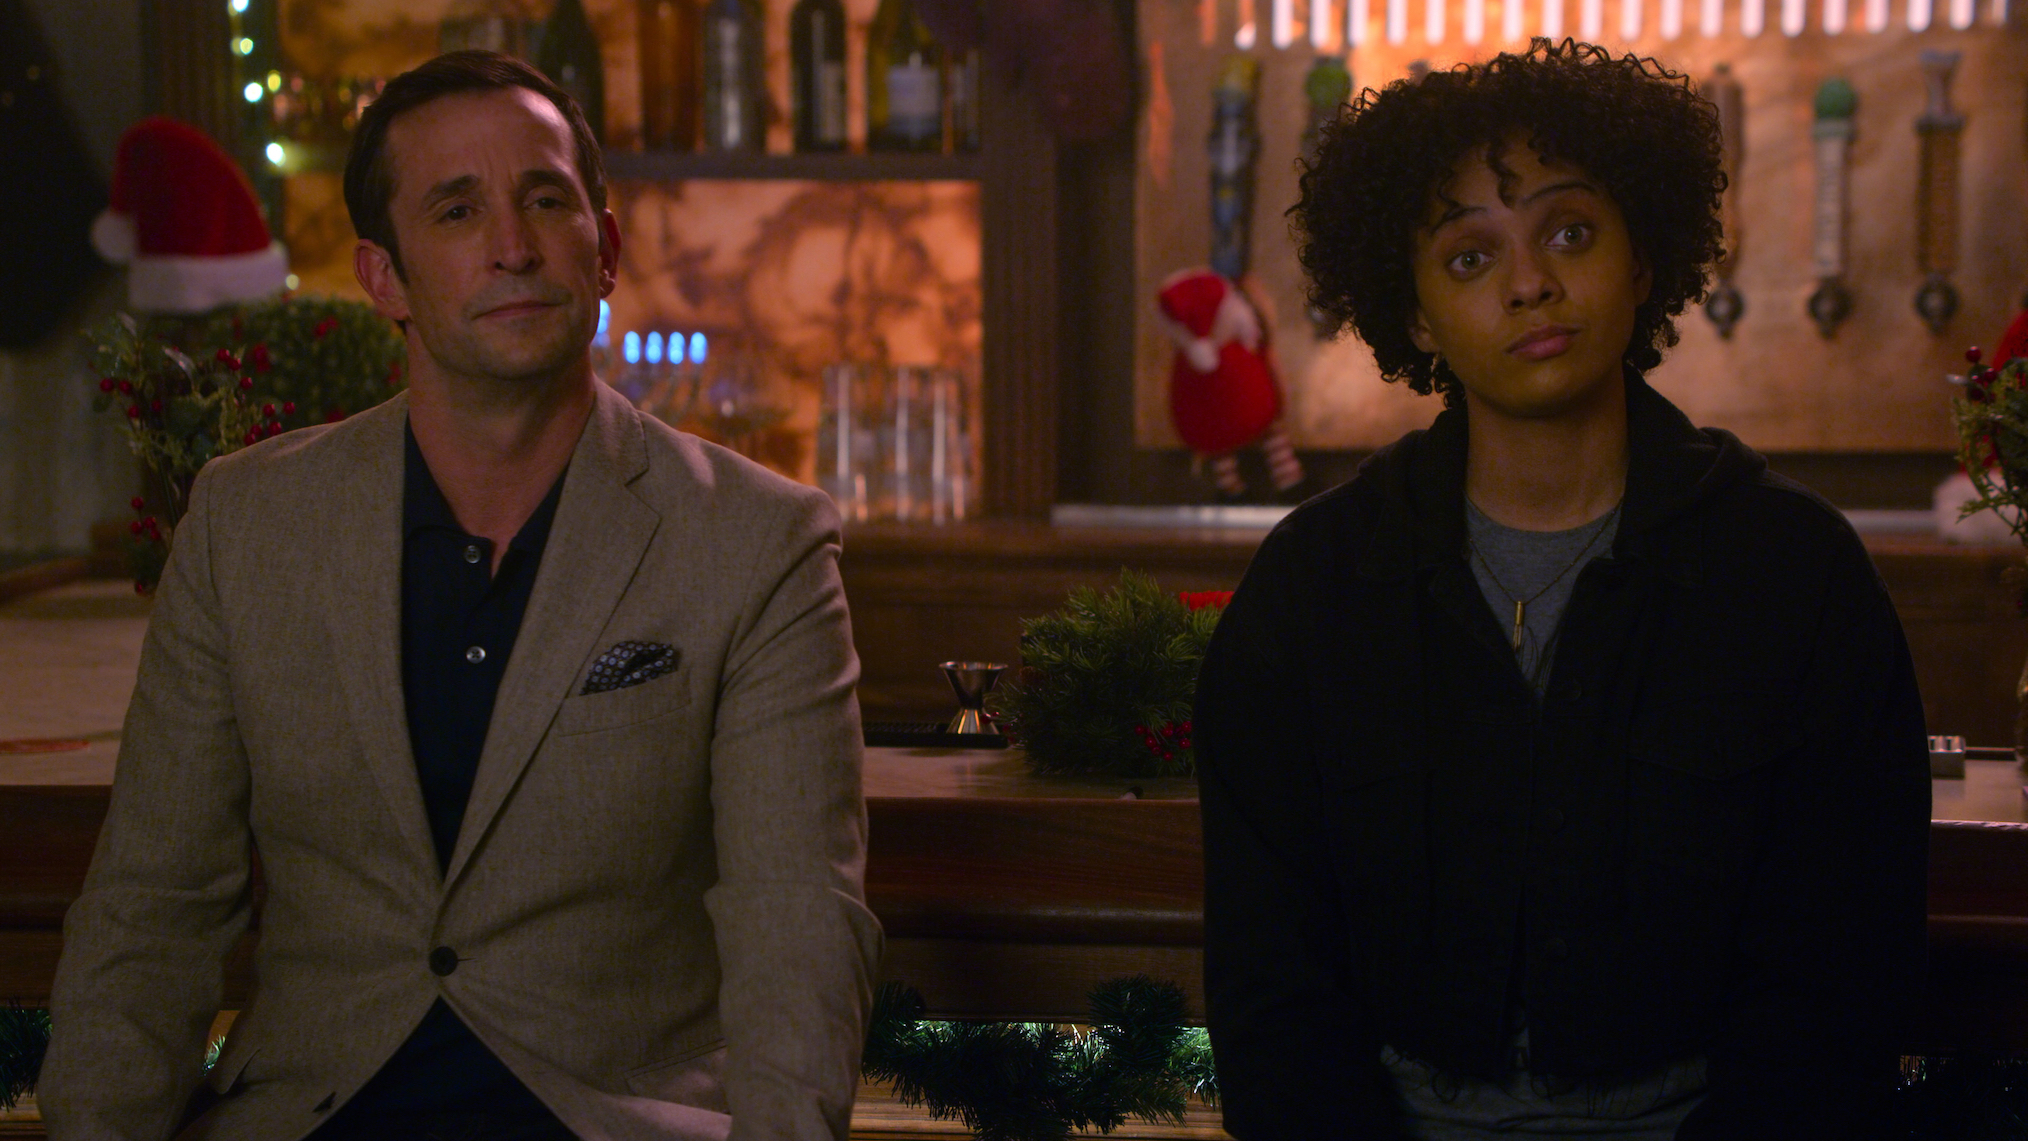 Noah Wyle as Harry, Aleyse Shannon as Breanna in Leverage Redemption